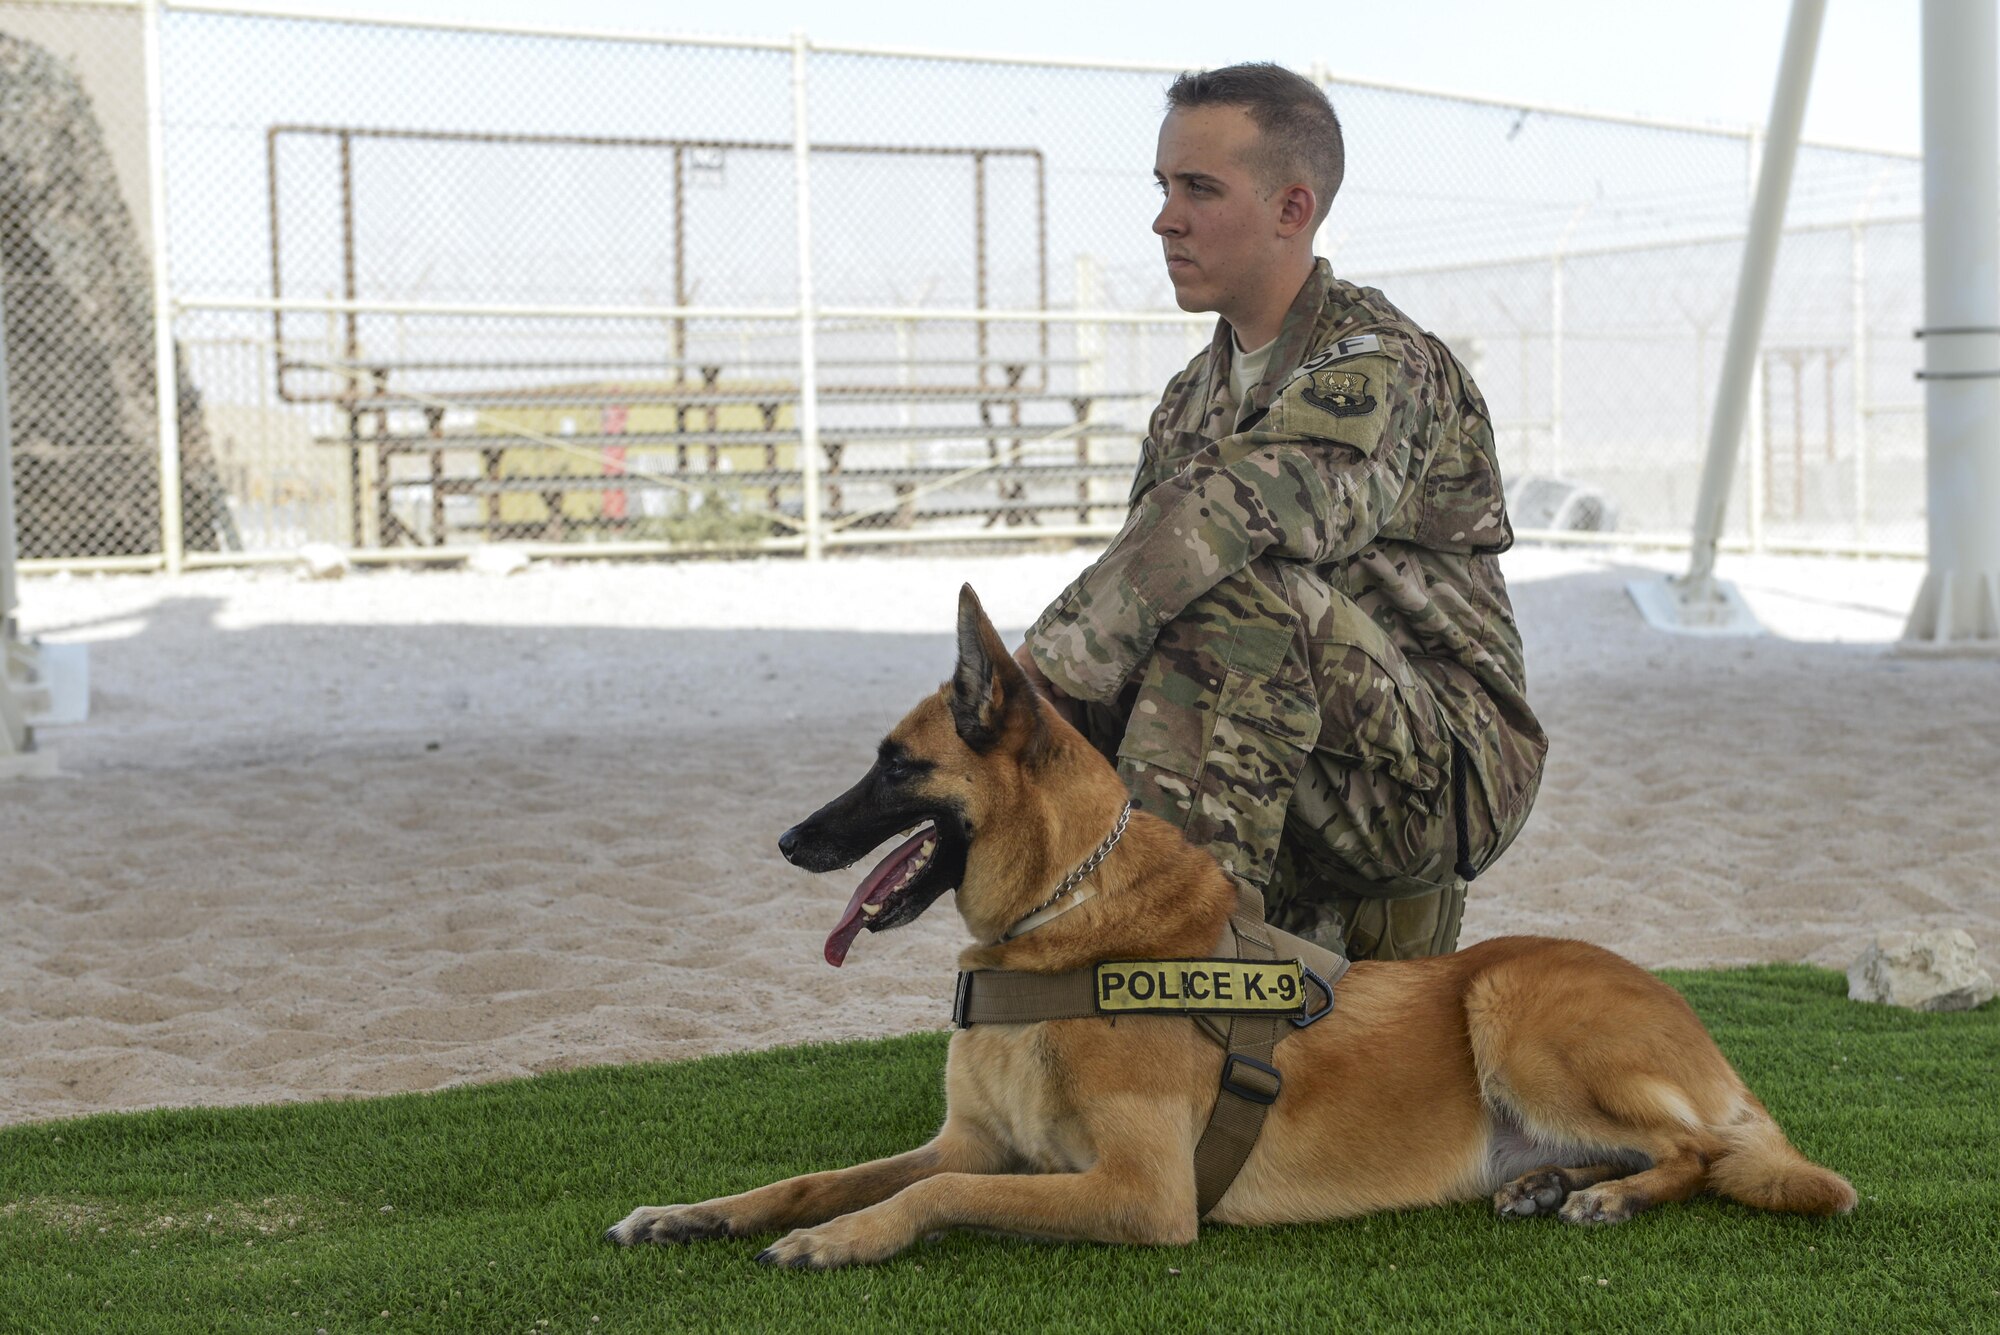 U.S. Air Force Senior Airman Brandon O’Toole, military working dog handler assigned to the 379th Expeditionary Security Forces Squadron, and his military working dog Oopey, wait for their turn to participate in a K-9 demonstration exercise at Al Udeid Air Base, Qatar, Aug. 17, 2017.